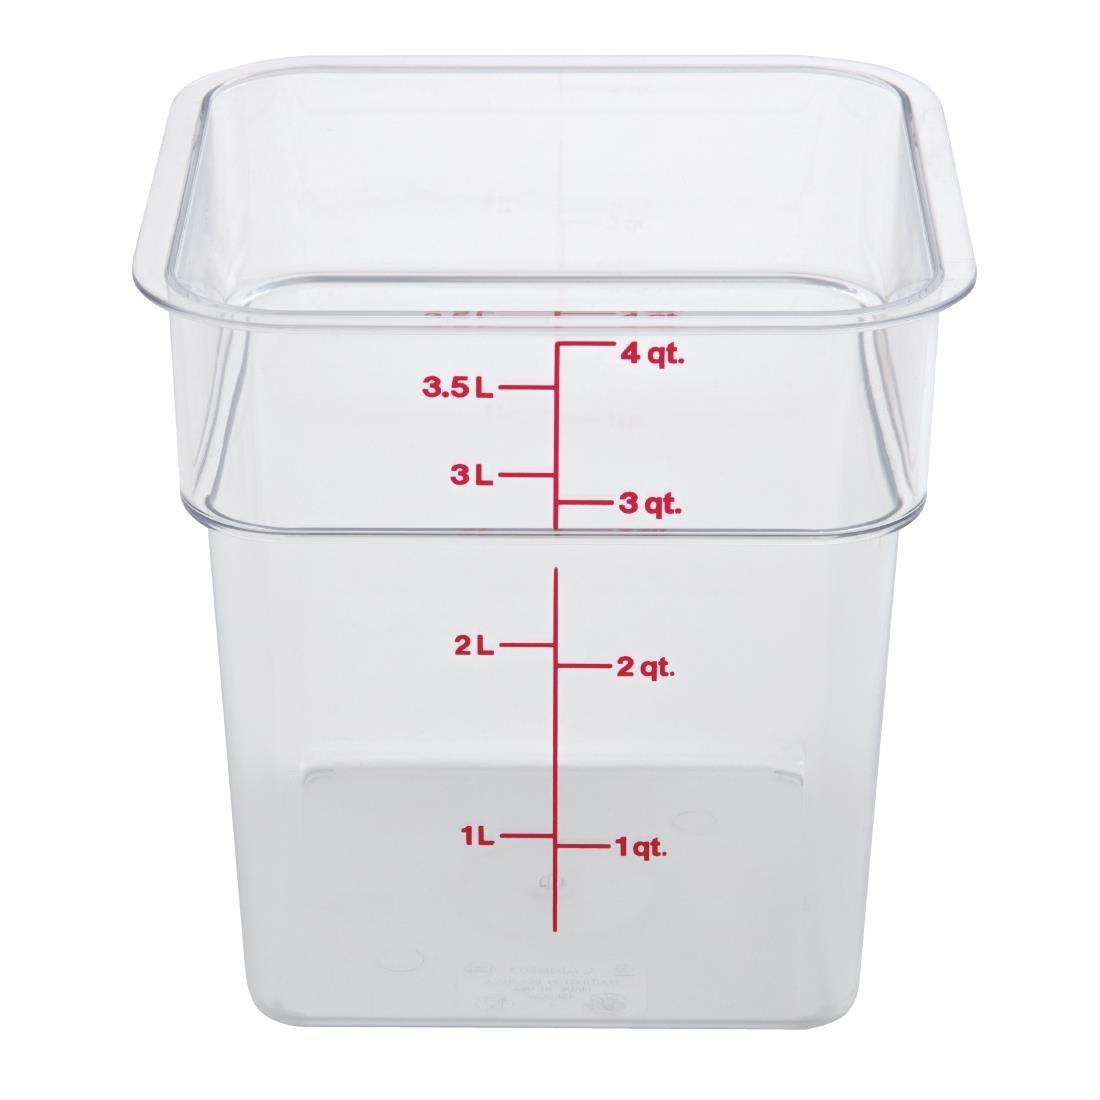 Cambro Square Polycarbonate Food Storage Container 3.8 Ltr - DT196  - 1